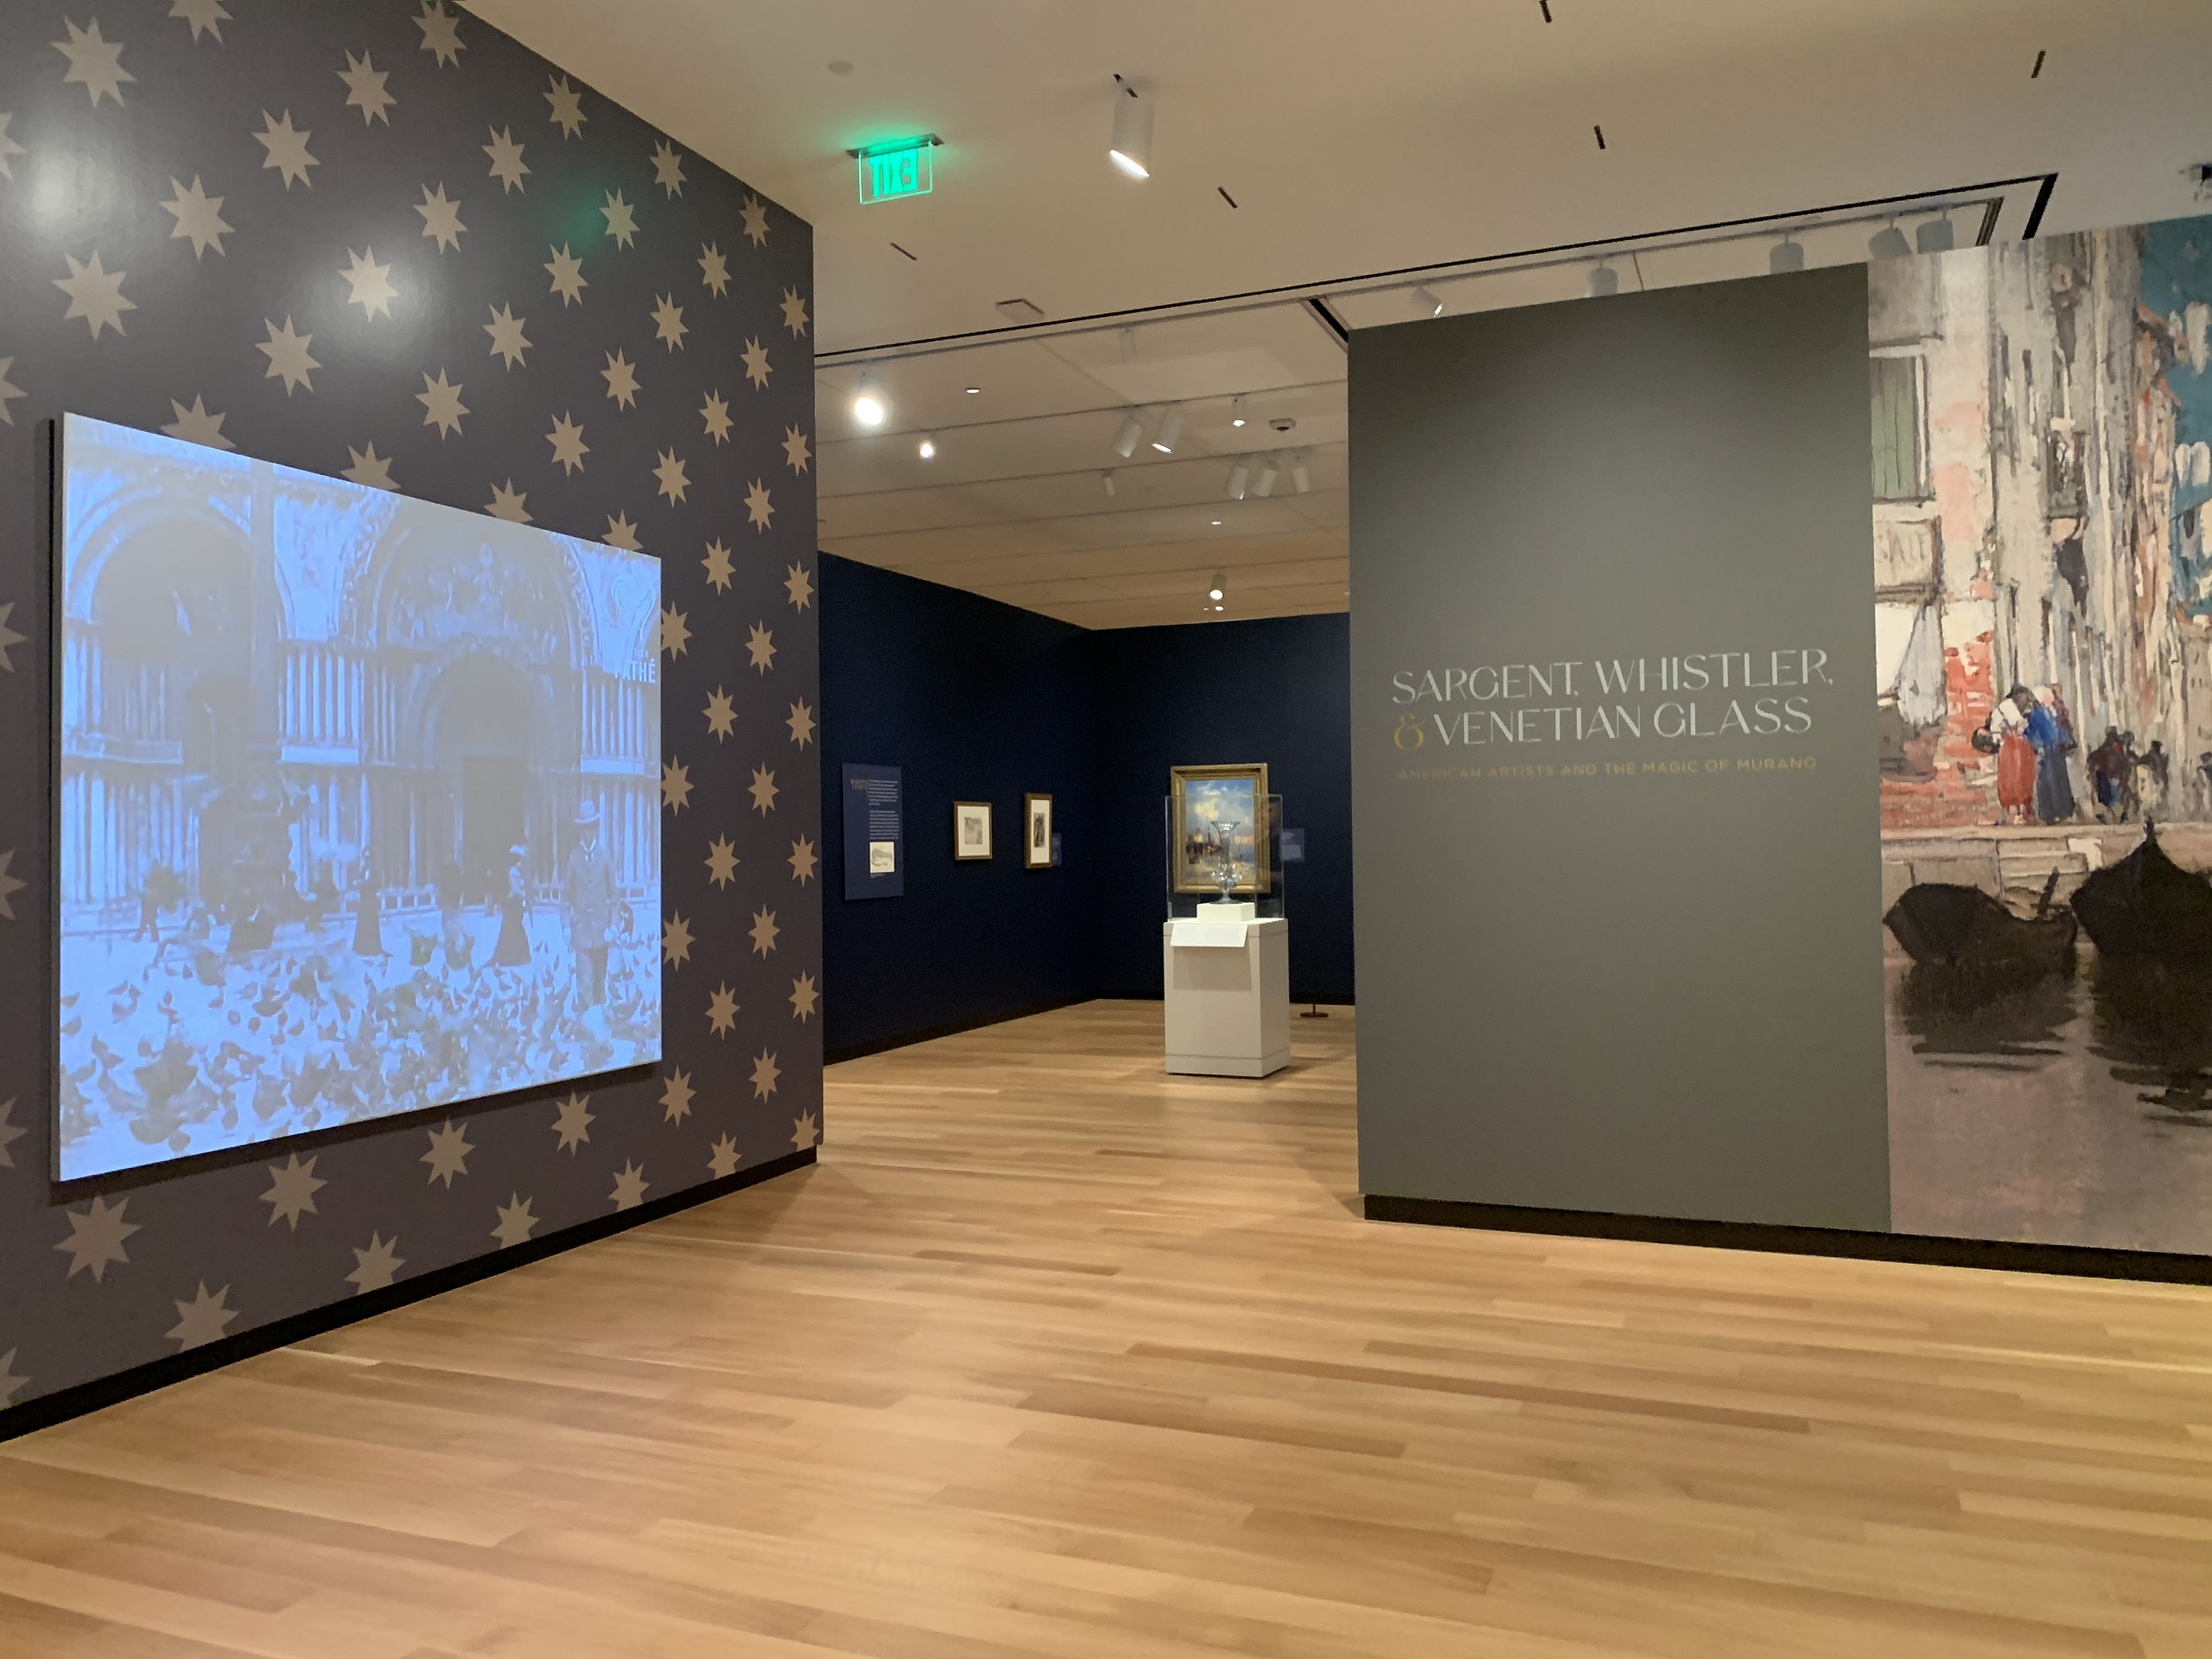 Entrance to a museum exhibition; the wall on the left has a digital projection of St. Mark's square, Venice, on a wall covered with stars on a blue ground. The wall on the right reads "SARGENT, WHISTLER & VENETIAN GLASS" and has a reproduction of a painting. 